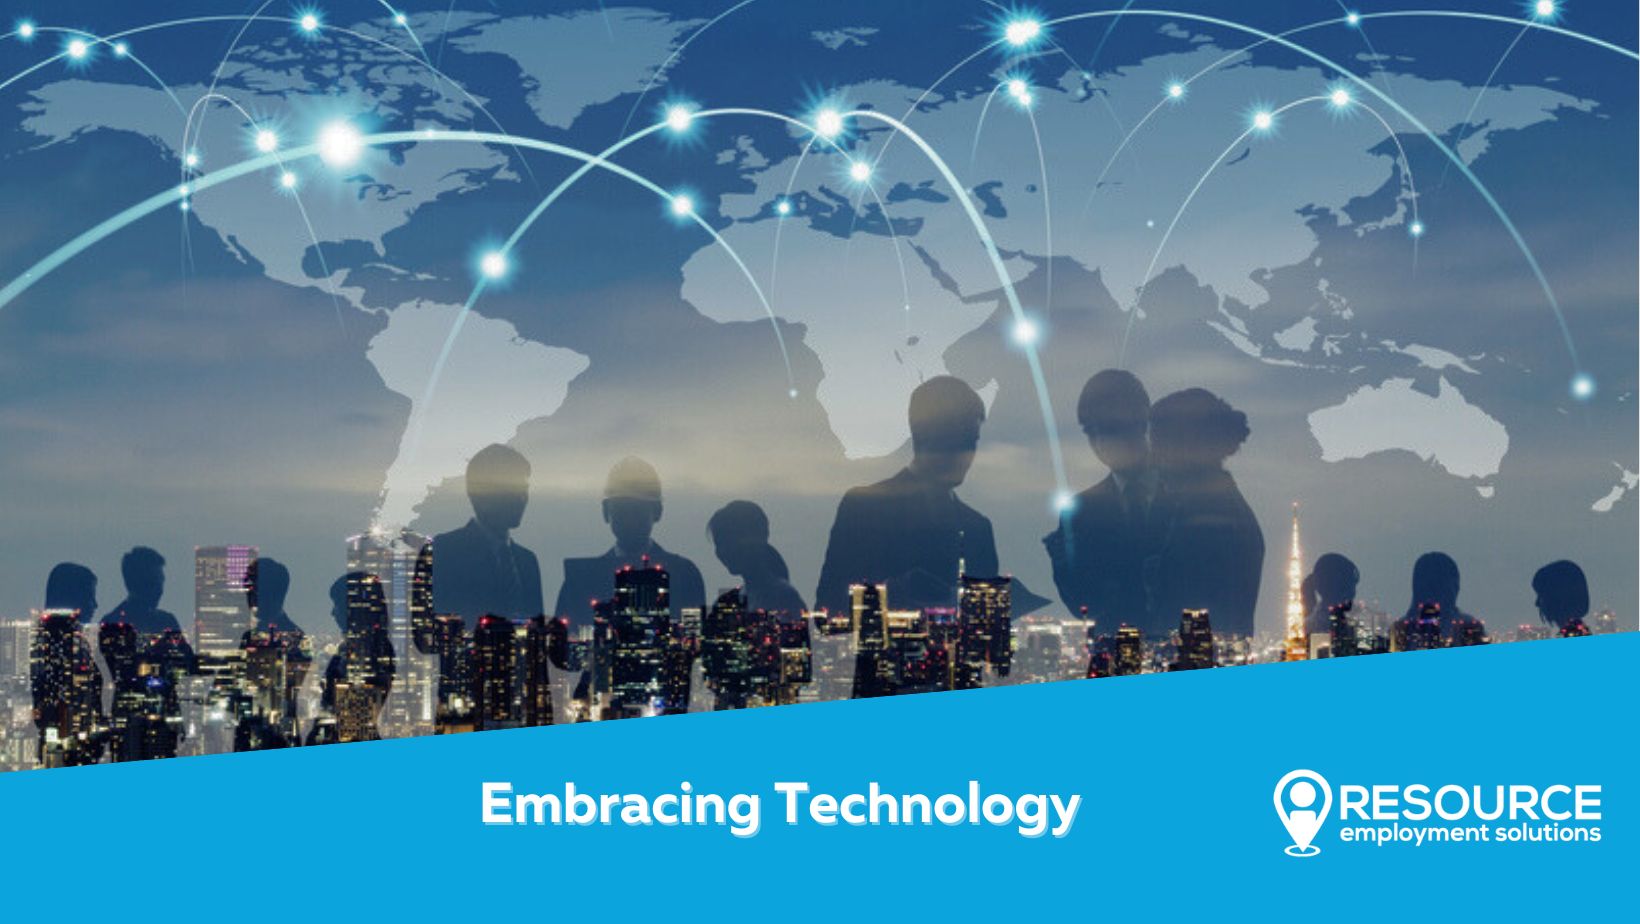 Embracing Technology: Building a Global Workforce Through Remote Collaboration